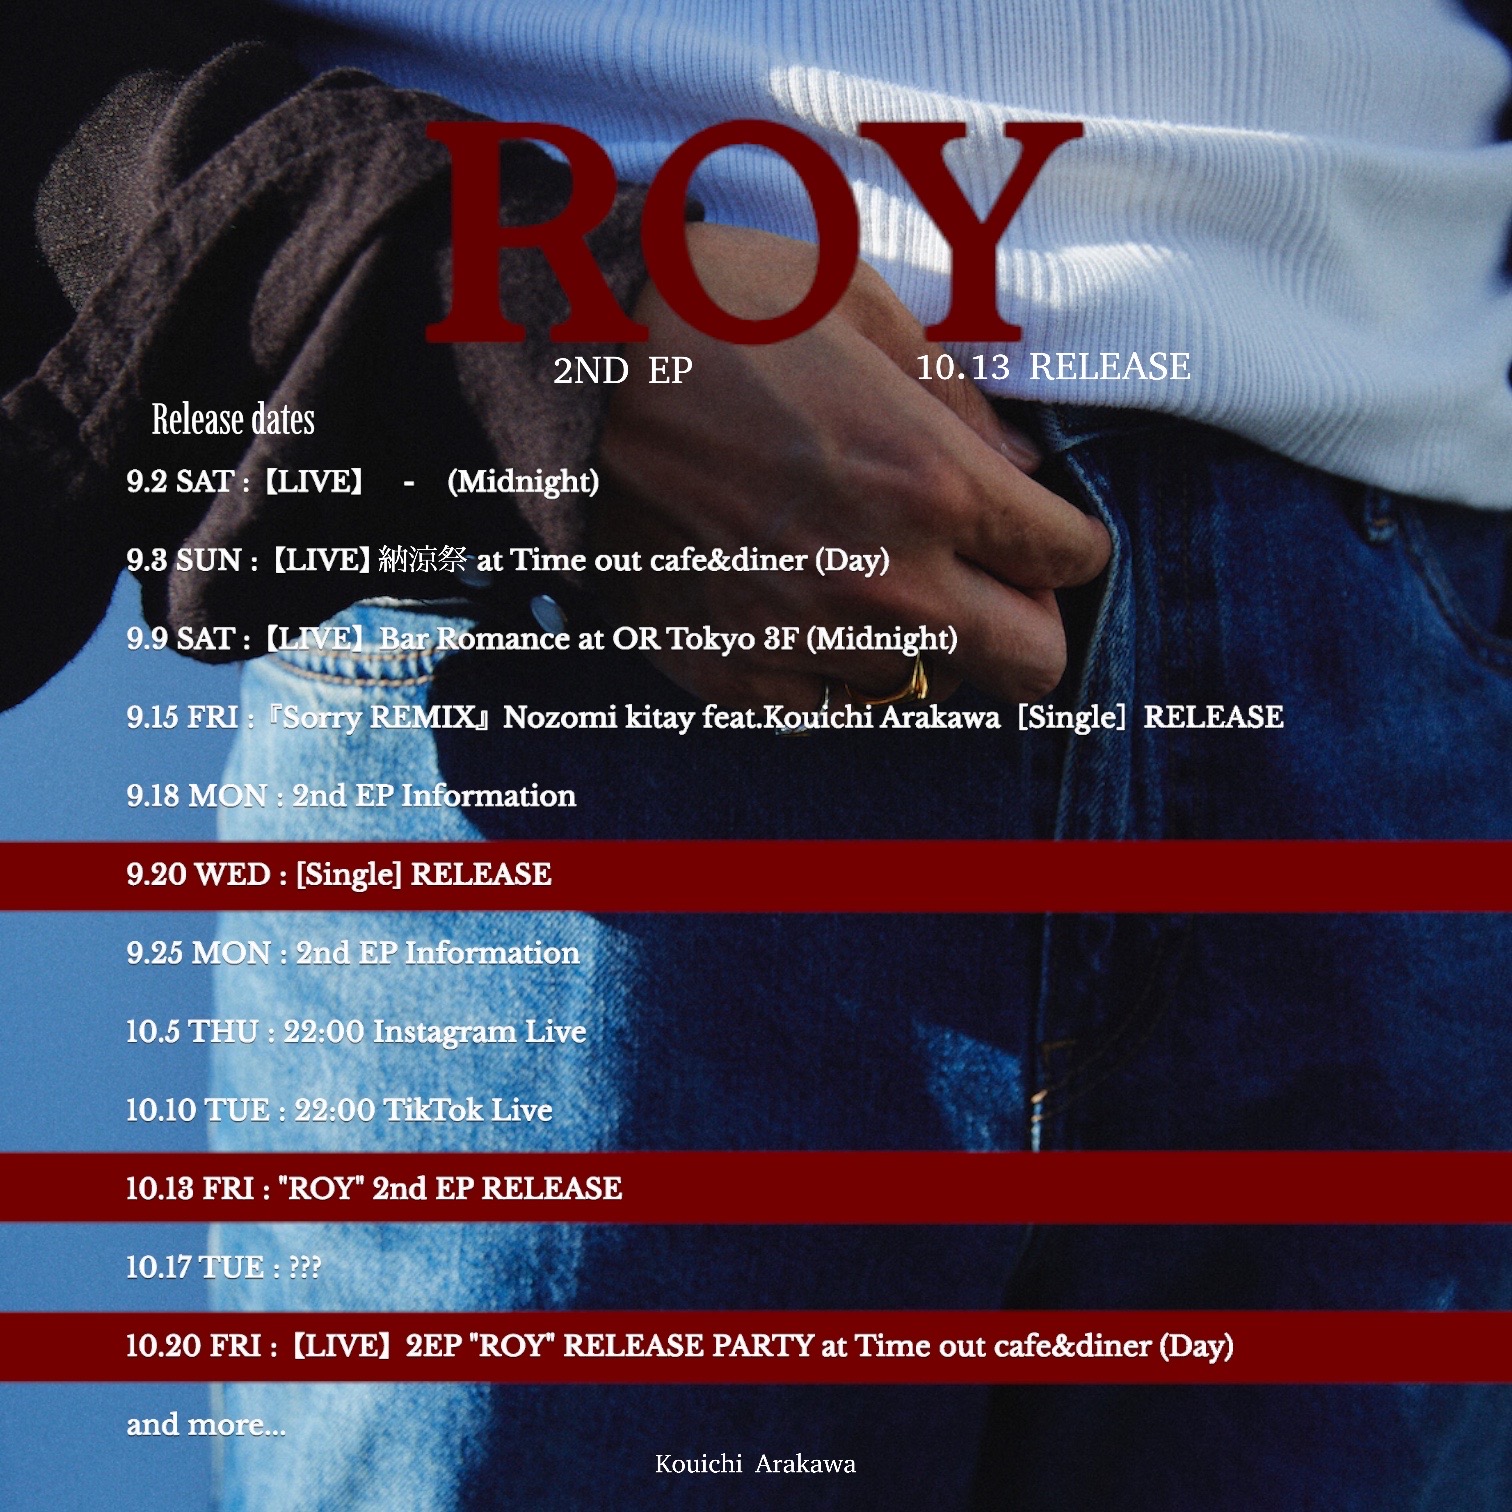 2nd EP “ROY” RELEASE PARTY